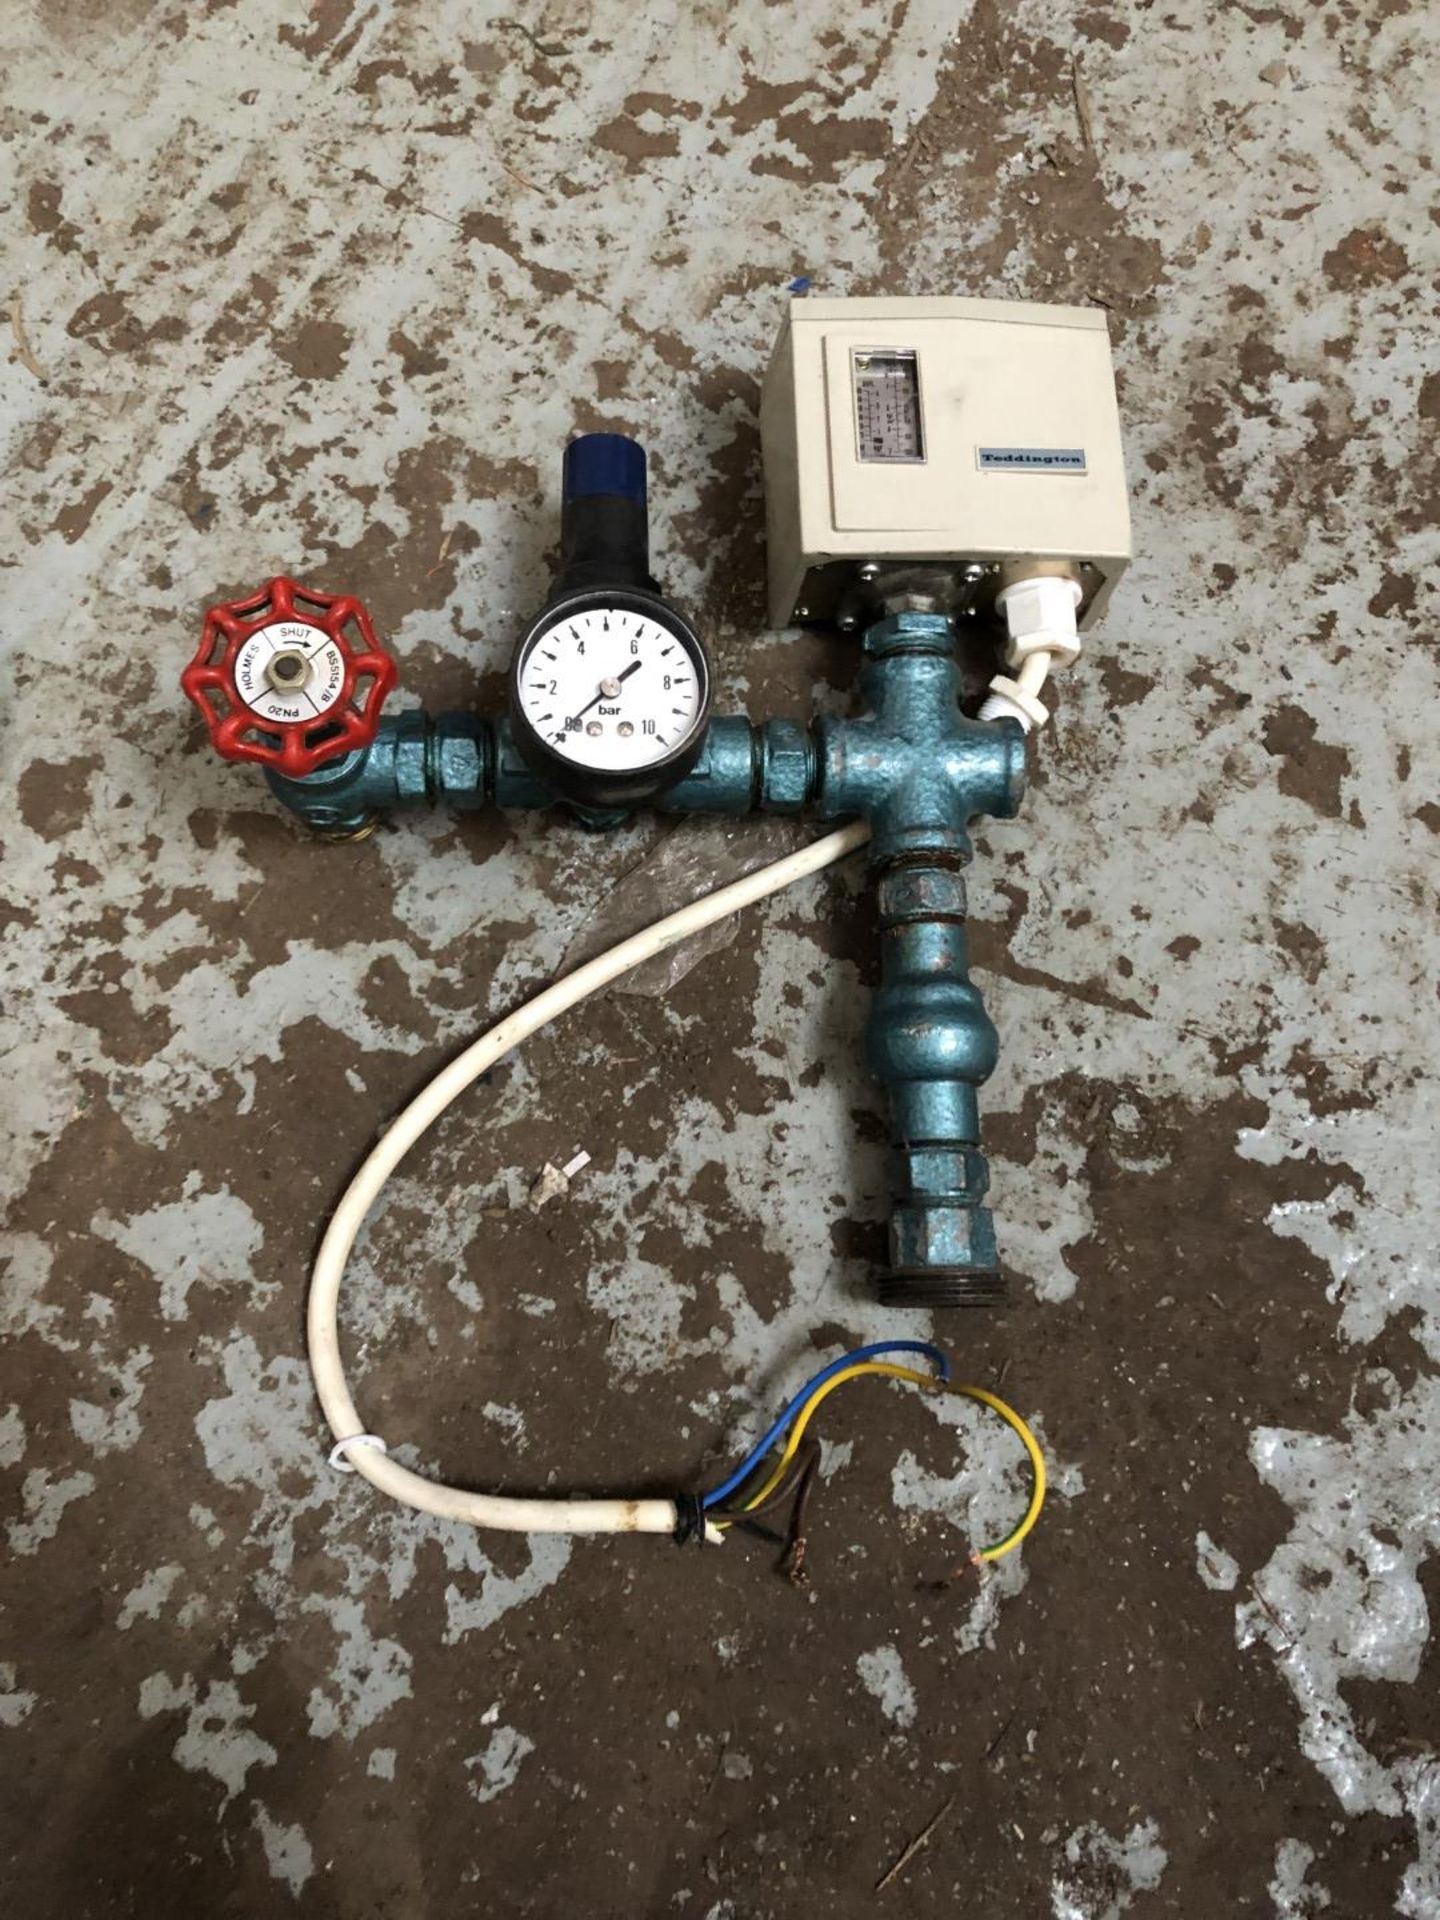 Lot Of Water Pressure Appliances - NP003 - CL344 - Location: Altrincham WA14 - Image 3 of 7